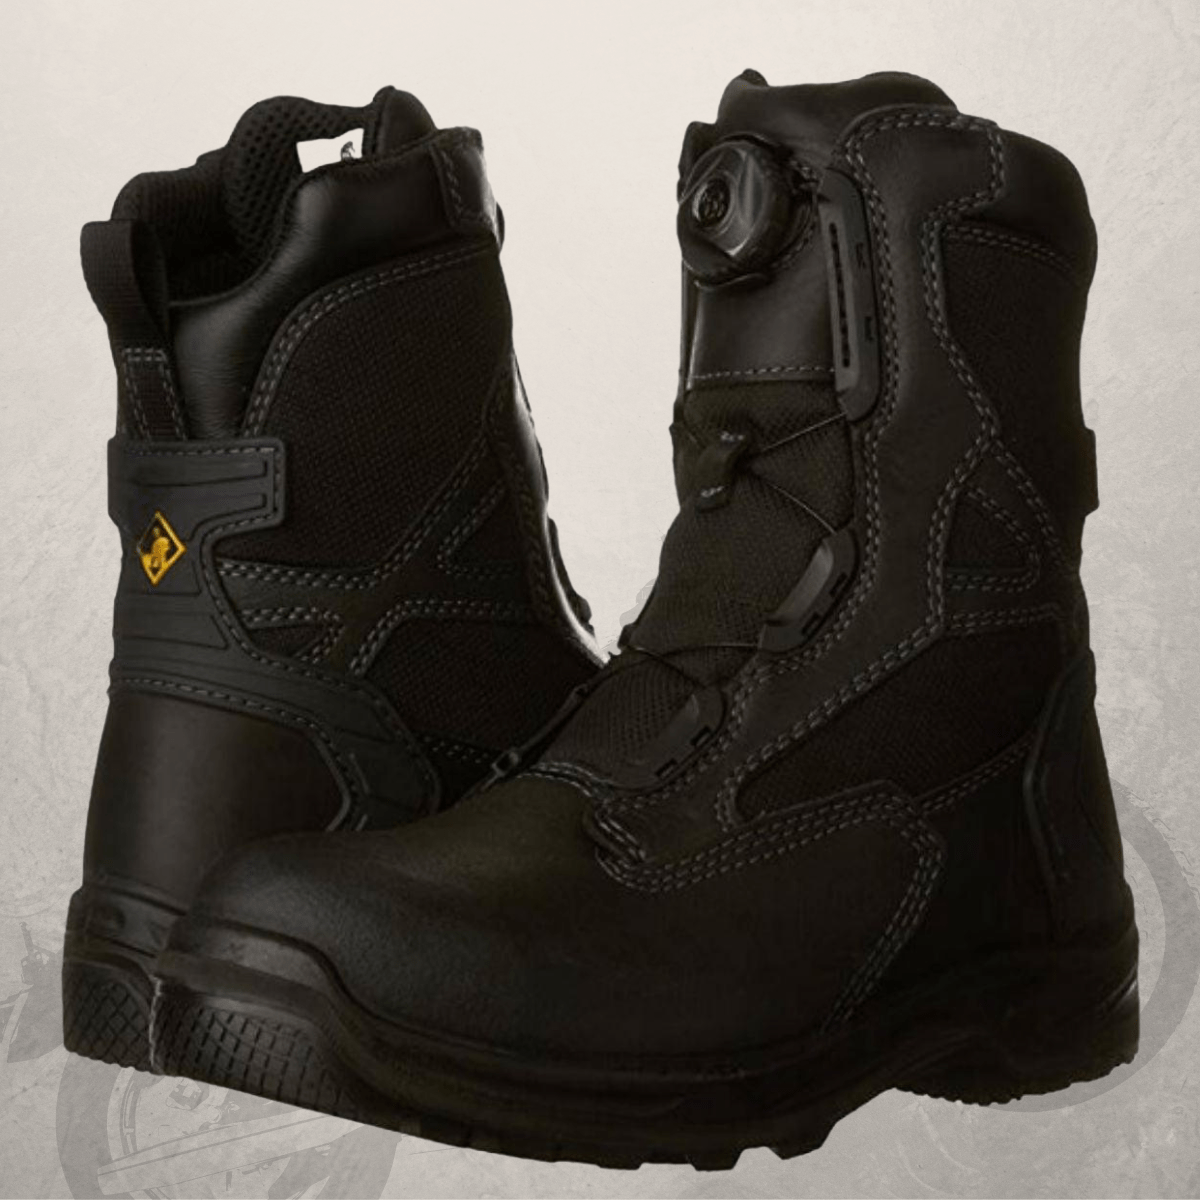 A pair of Boa Work Boots Terra Rexton BOA® Best for Motorcycle & Work showcasing their safety features on a white background.